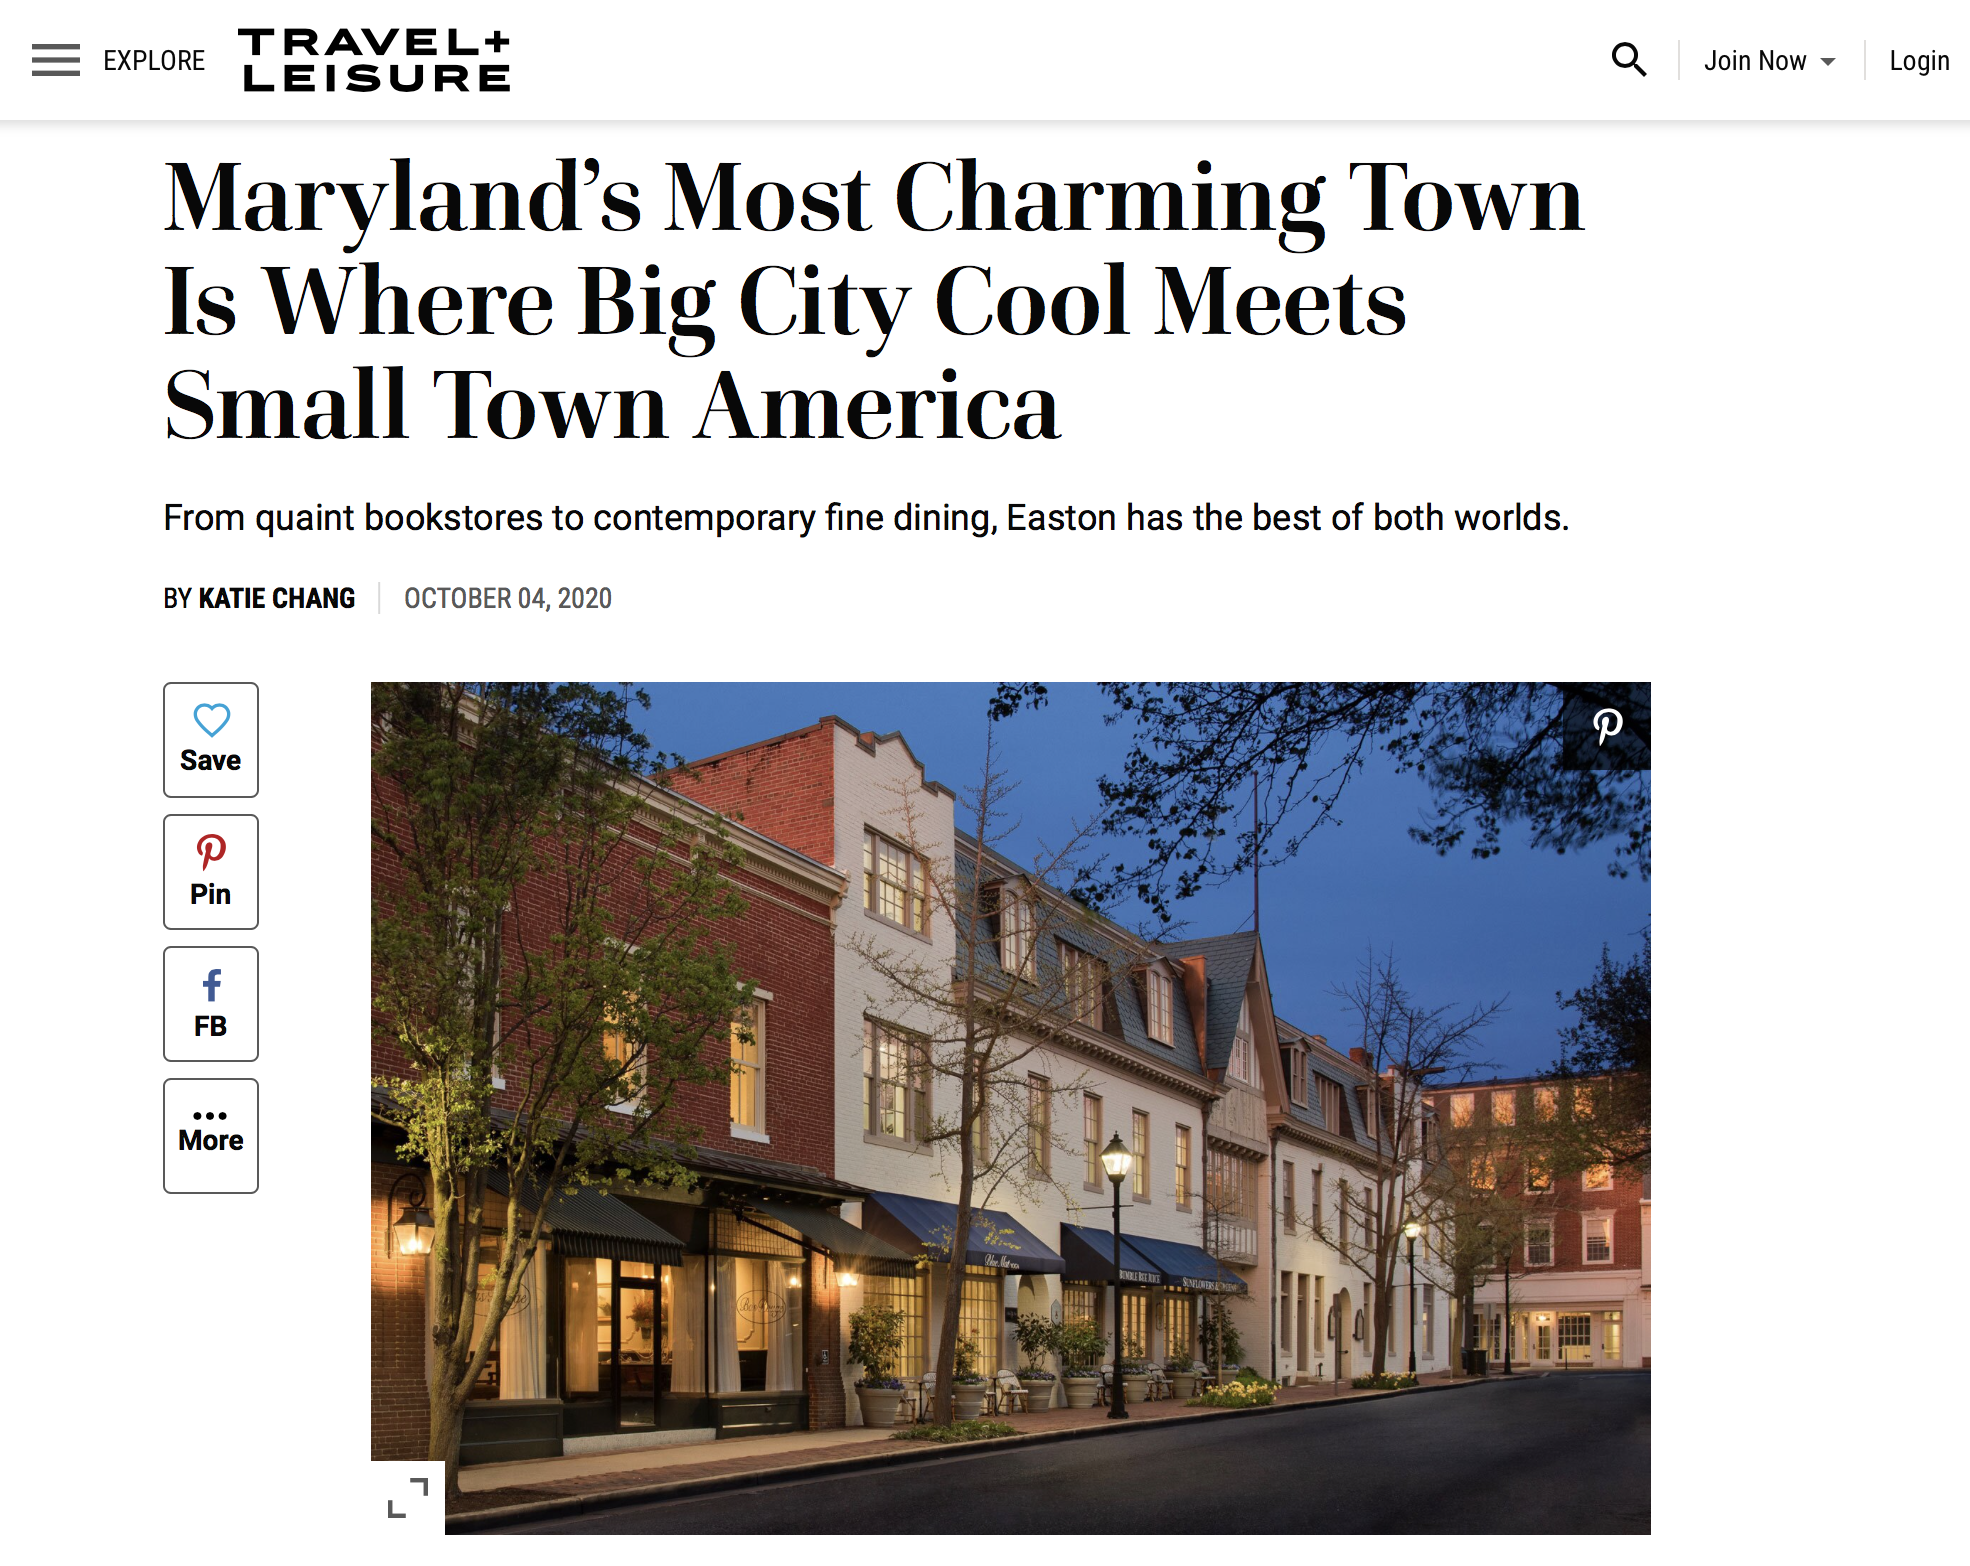 Maryland’s Most Charming Town